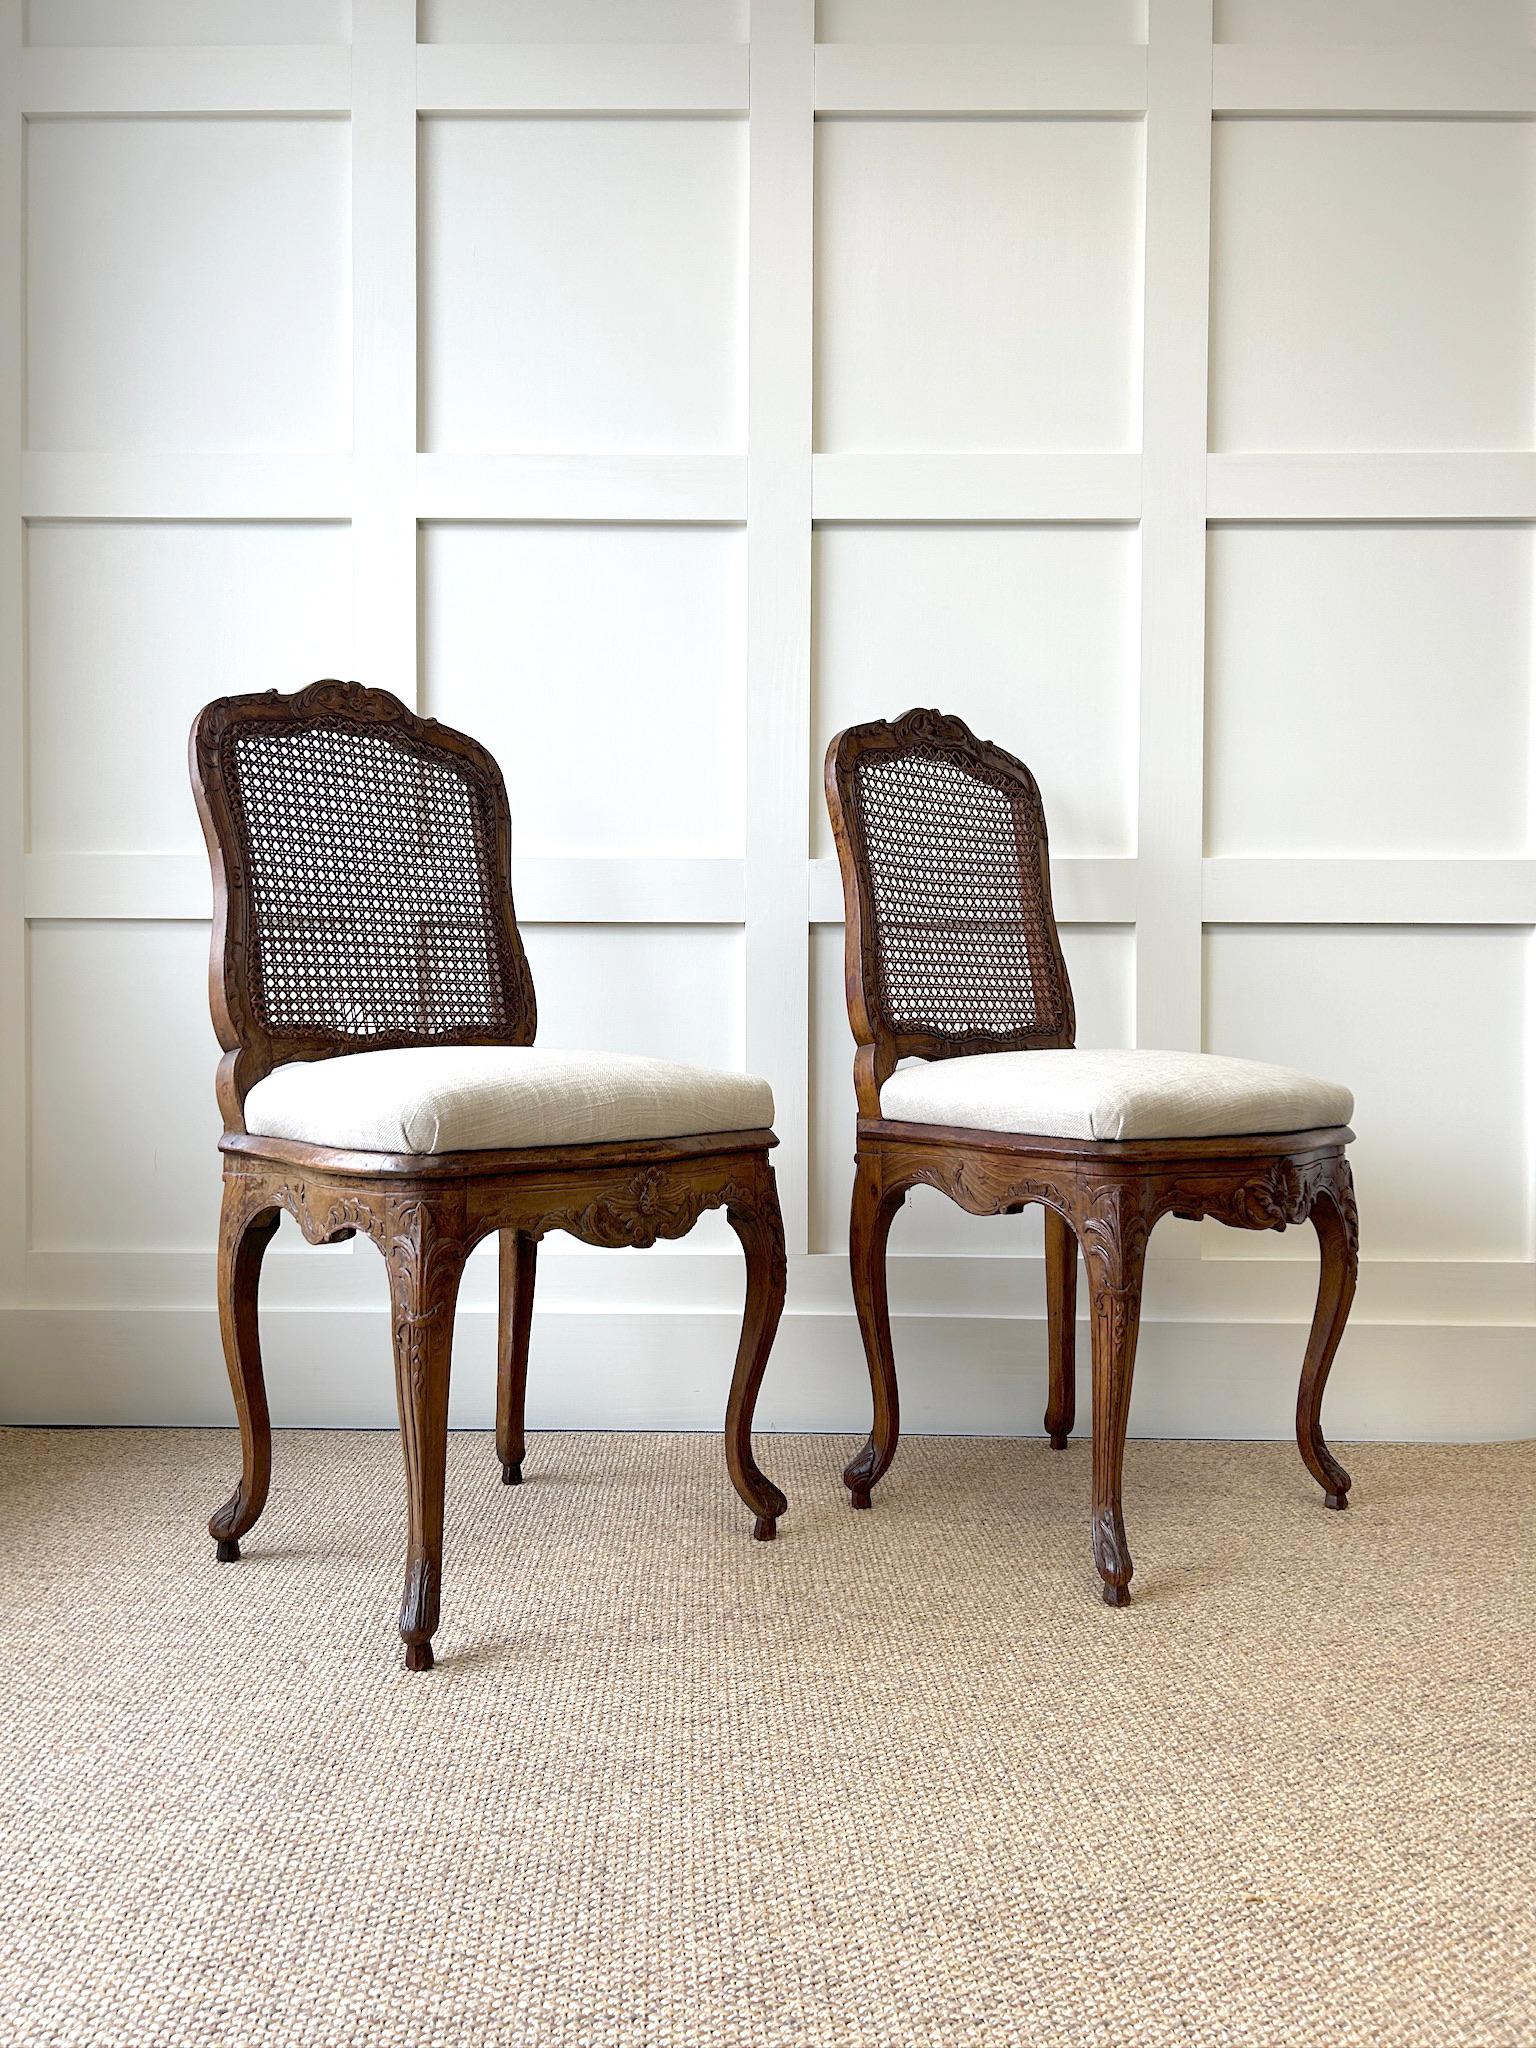 British A Lovely Pair of Early 19th Century French Salon Chairs For Sale